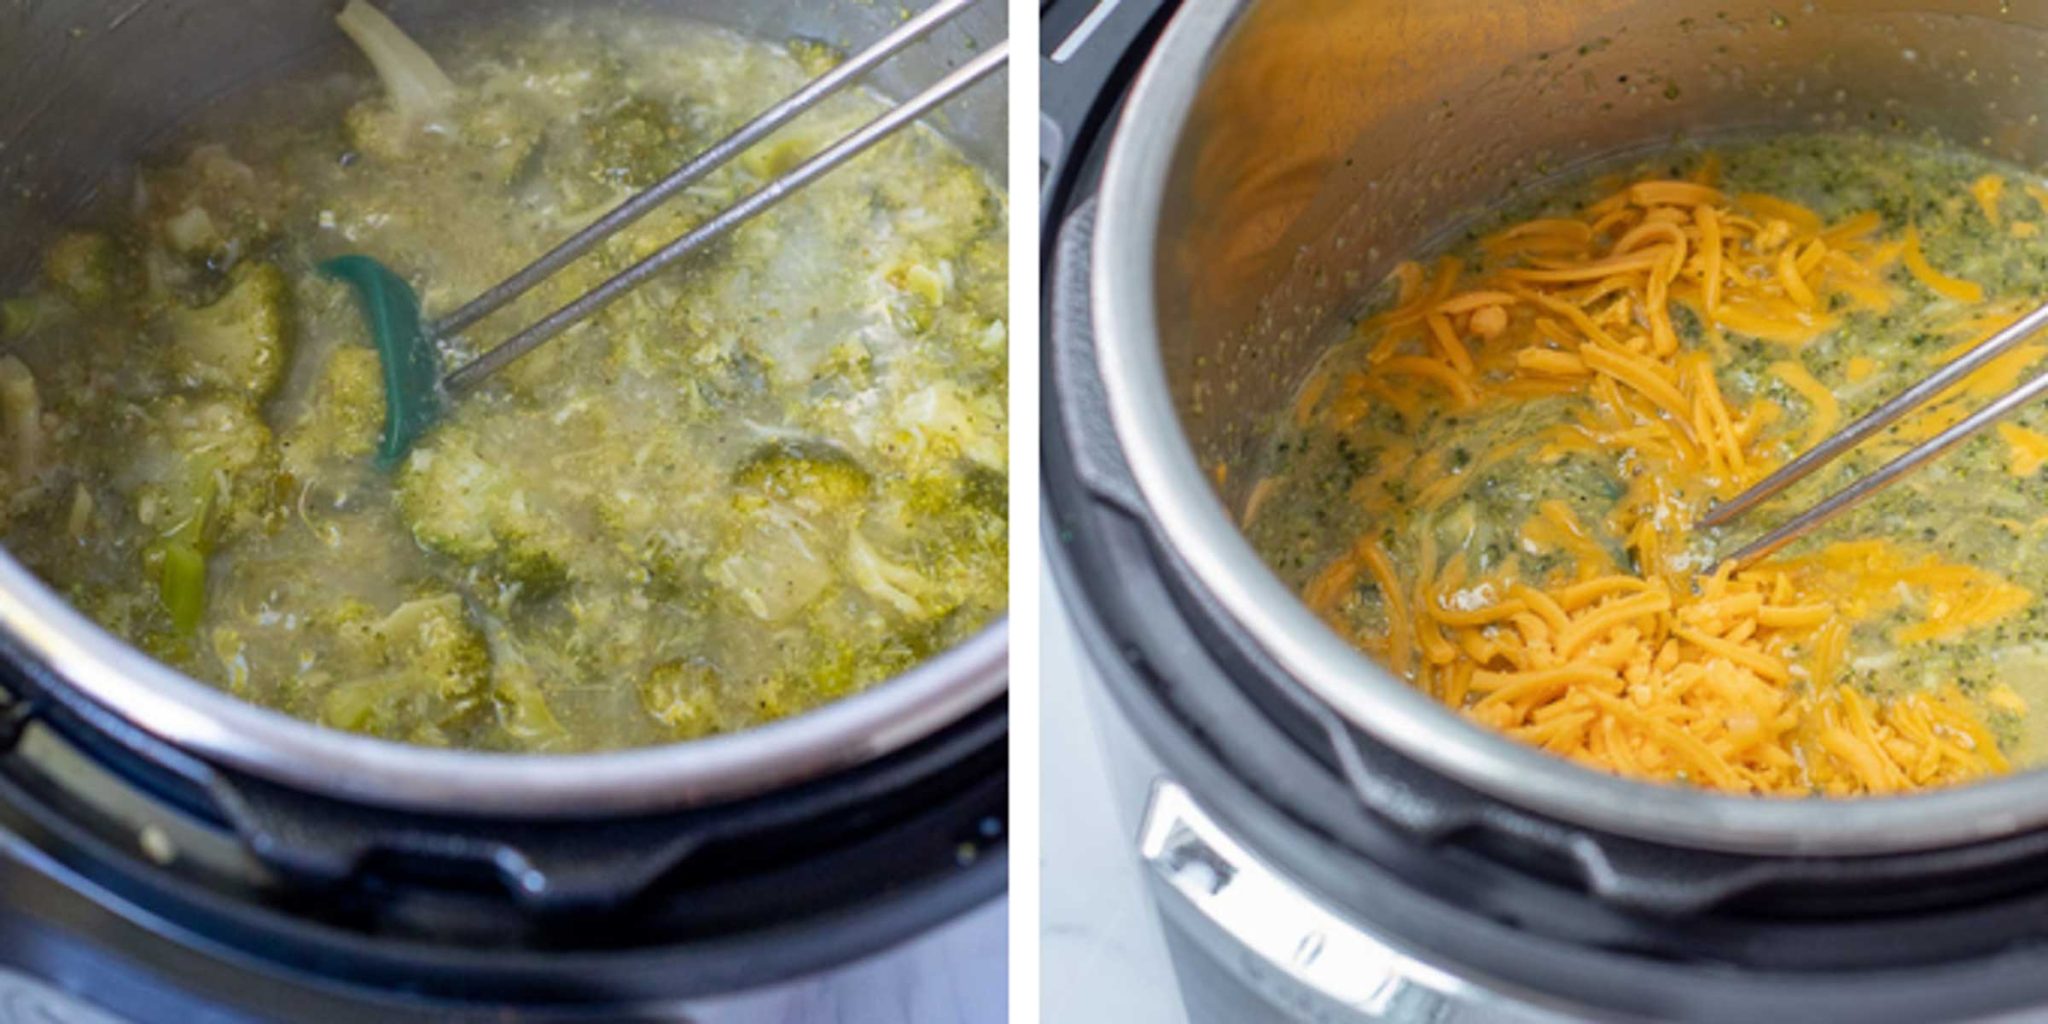 images showing how to make instant pot broccoli cheese soup